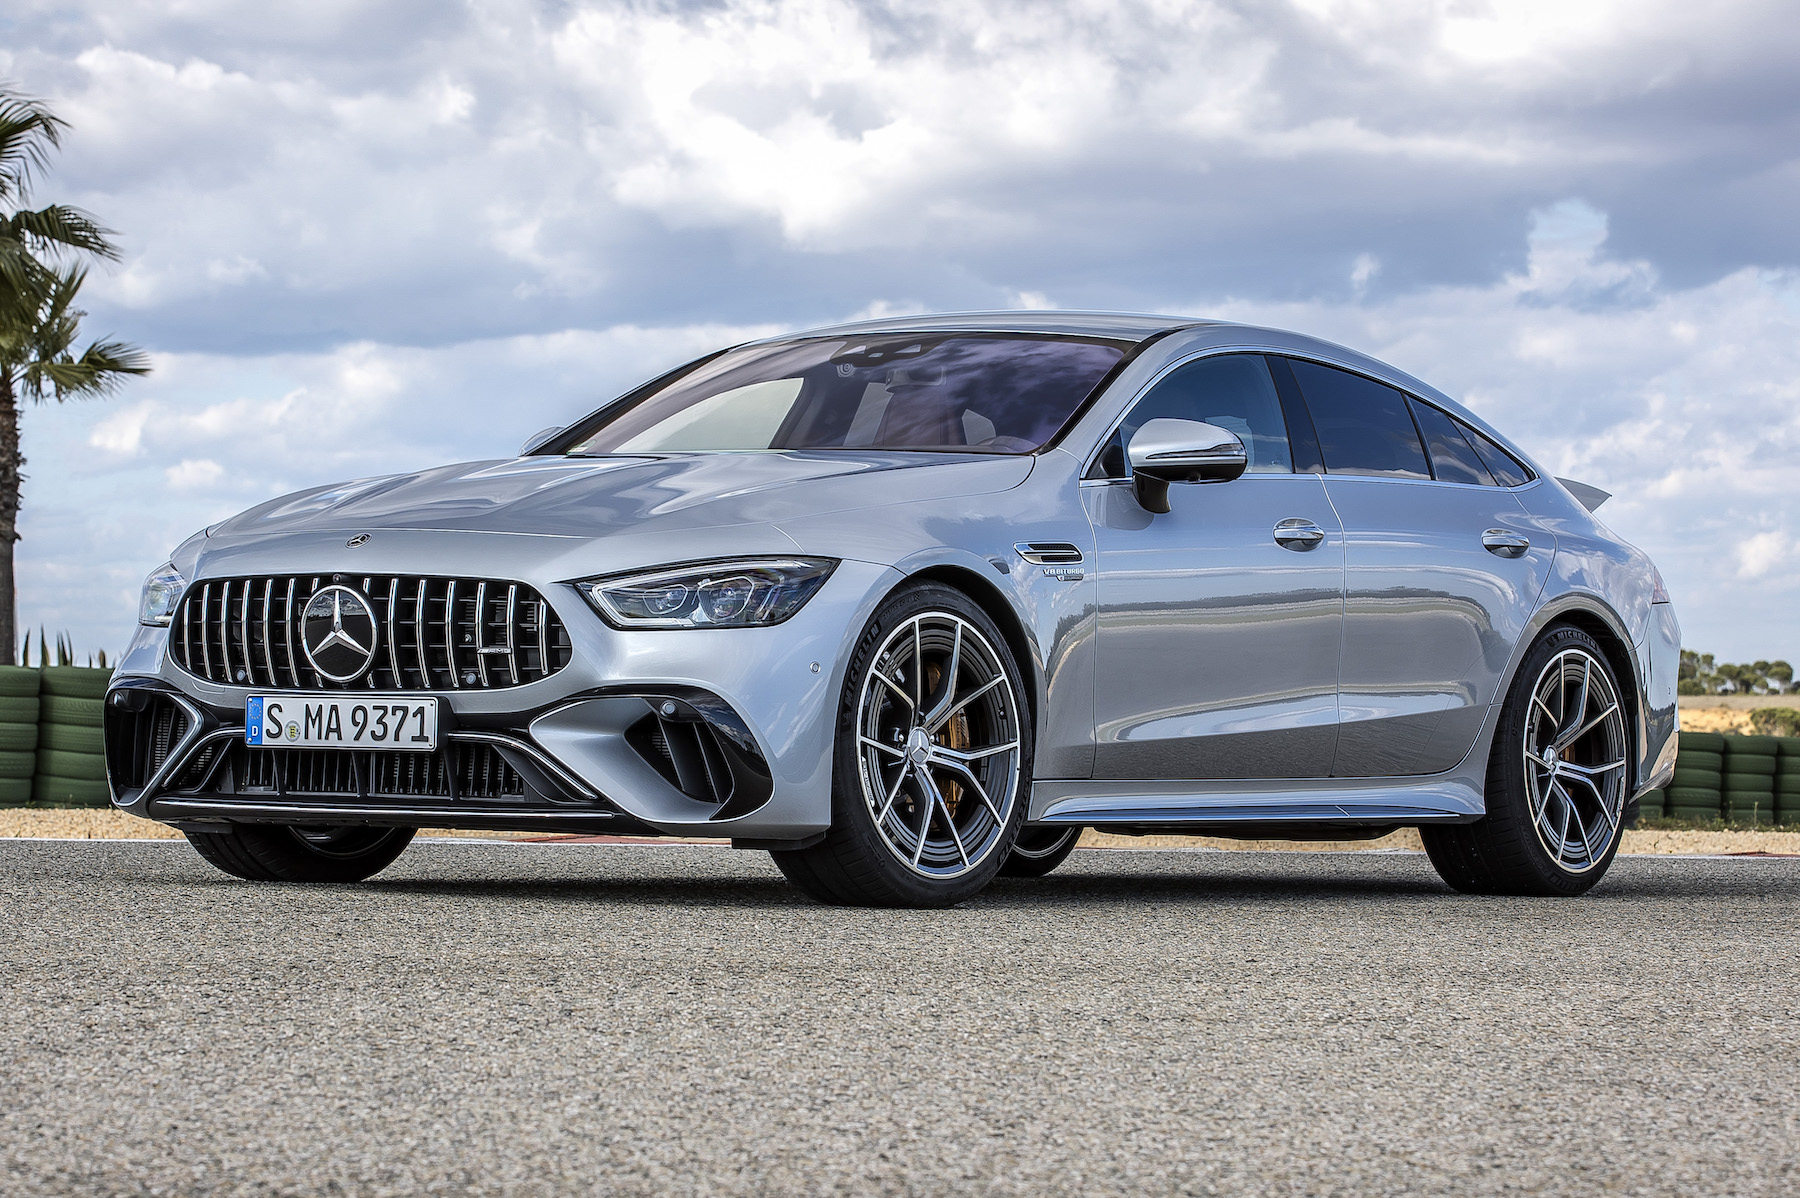 Mercedes-AMG GT 63 S E Performance Hits Showrooms Priced at $399,900